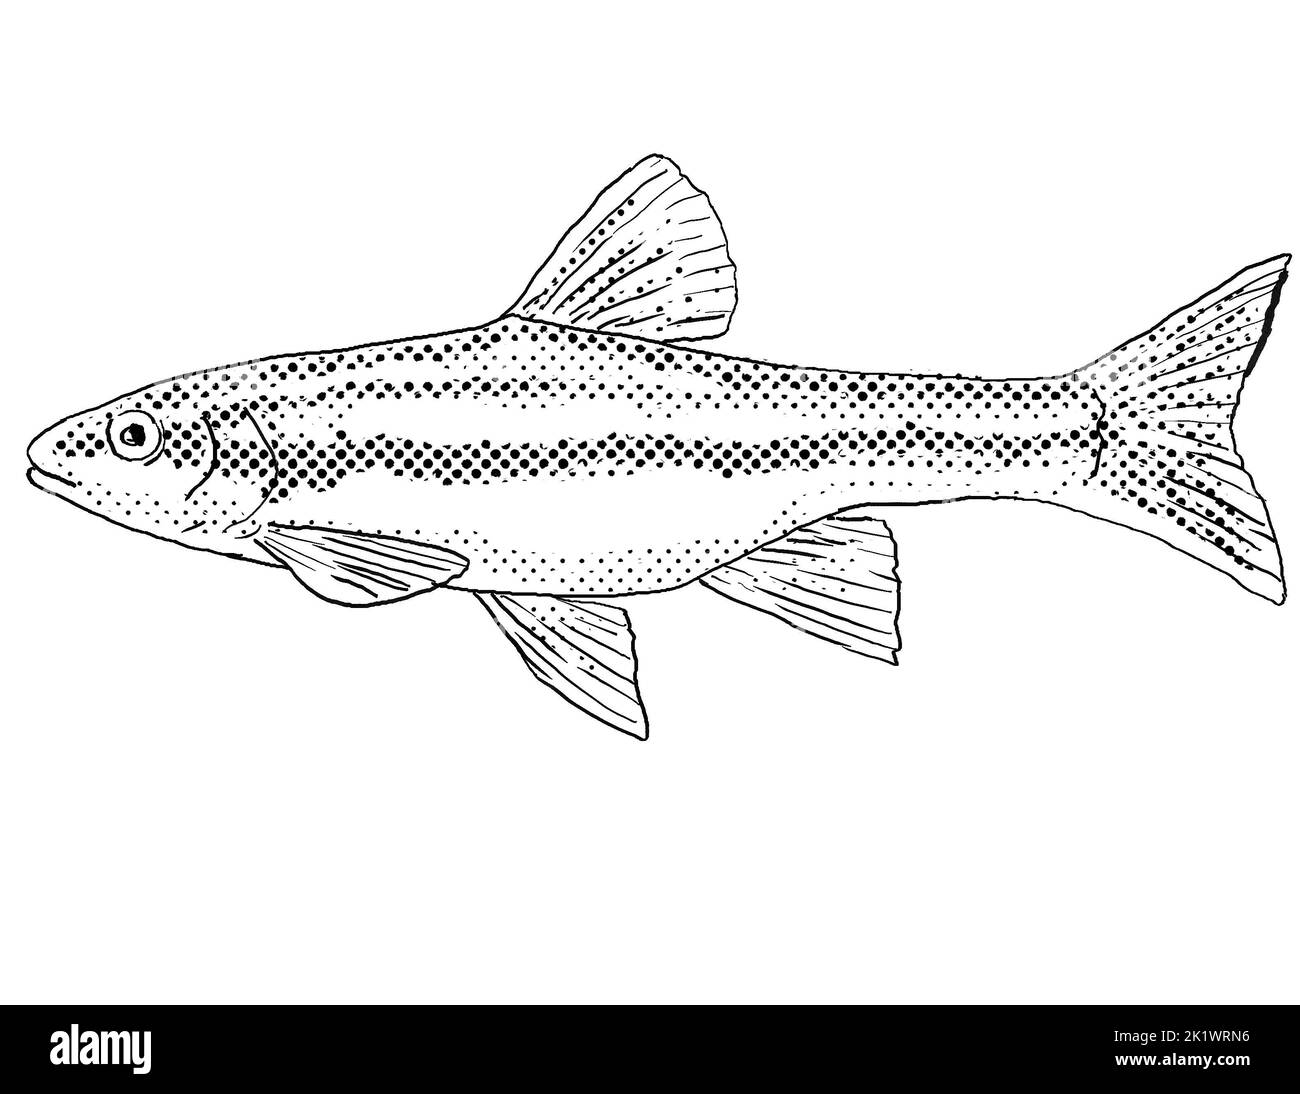 Cartoon style line drawing of a southern redbelly dace or Chrosomus erythrogaster a freshwater fish endemic to North America with halftone dots shadin Stock Photo